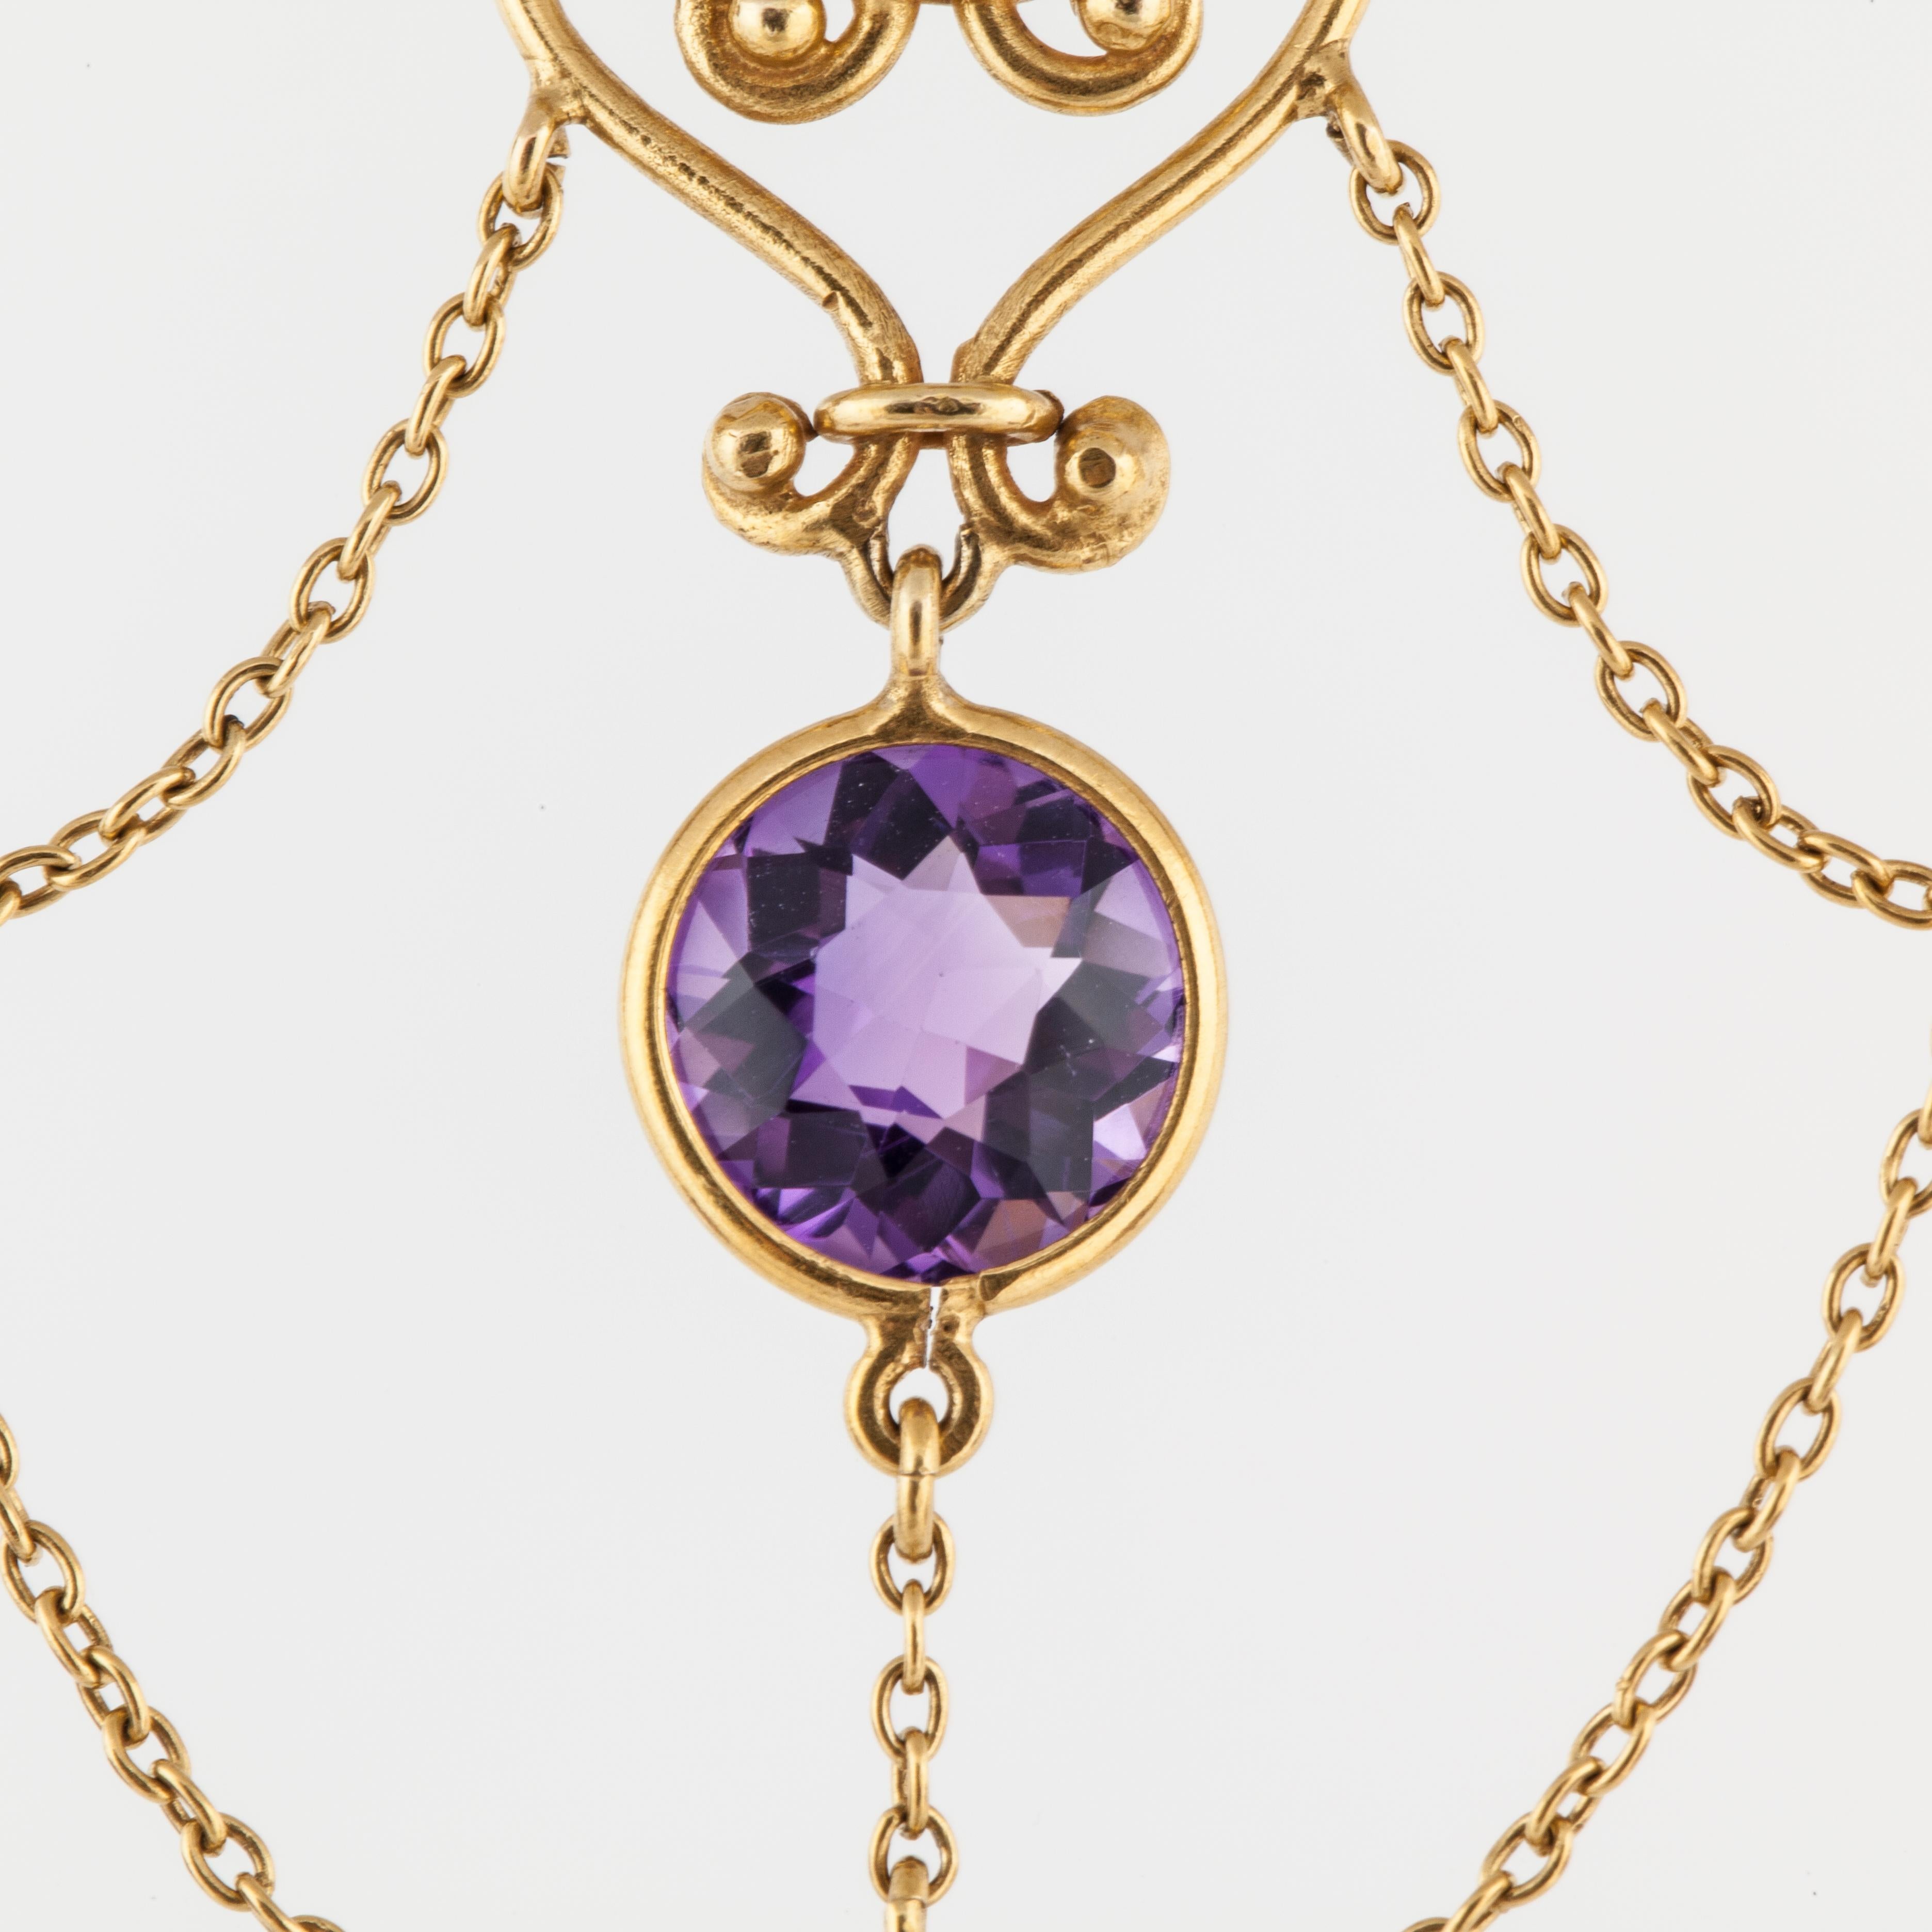 Swag necklace in 18K yellow gold featuring round amethysts with a seed pearl accent.  There are nine bezel-set amethysts that total 11 carats.  There is also one small seed pearl in the center.  The necklace measures 14 1/2 inches long and hangs 2